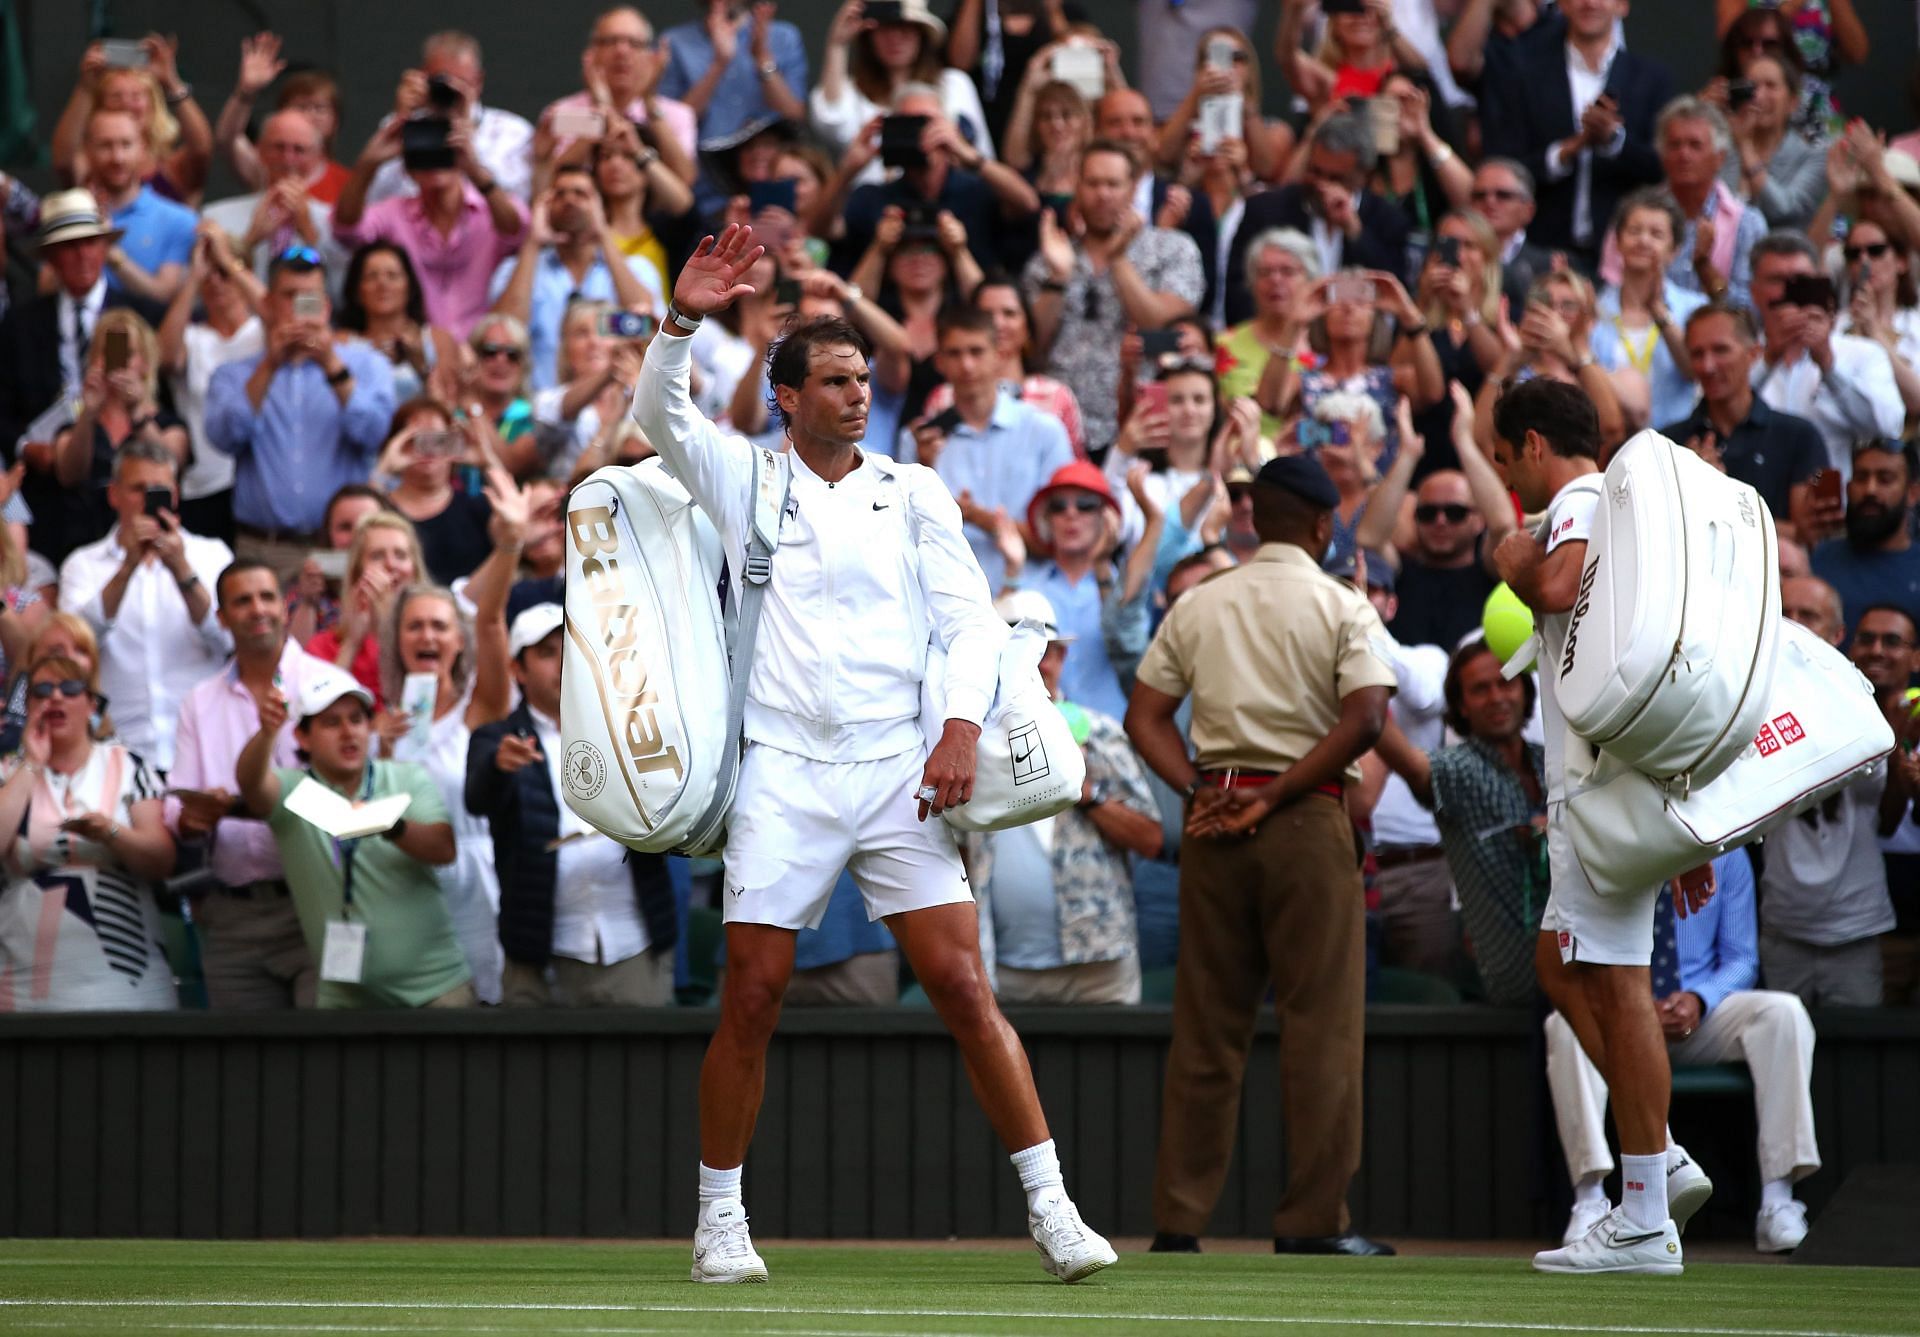 Rafael Nadal acknowledges Wimbledon crowd. Photo by Clive Brunskill/Getty Images